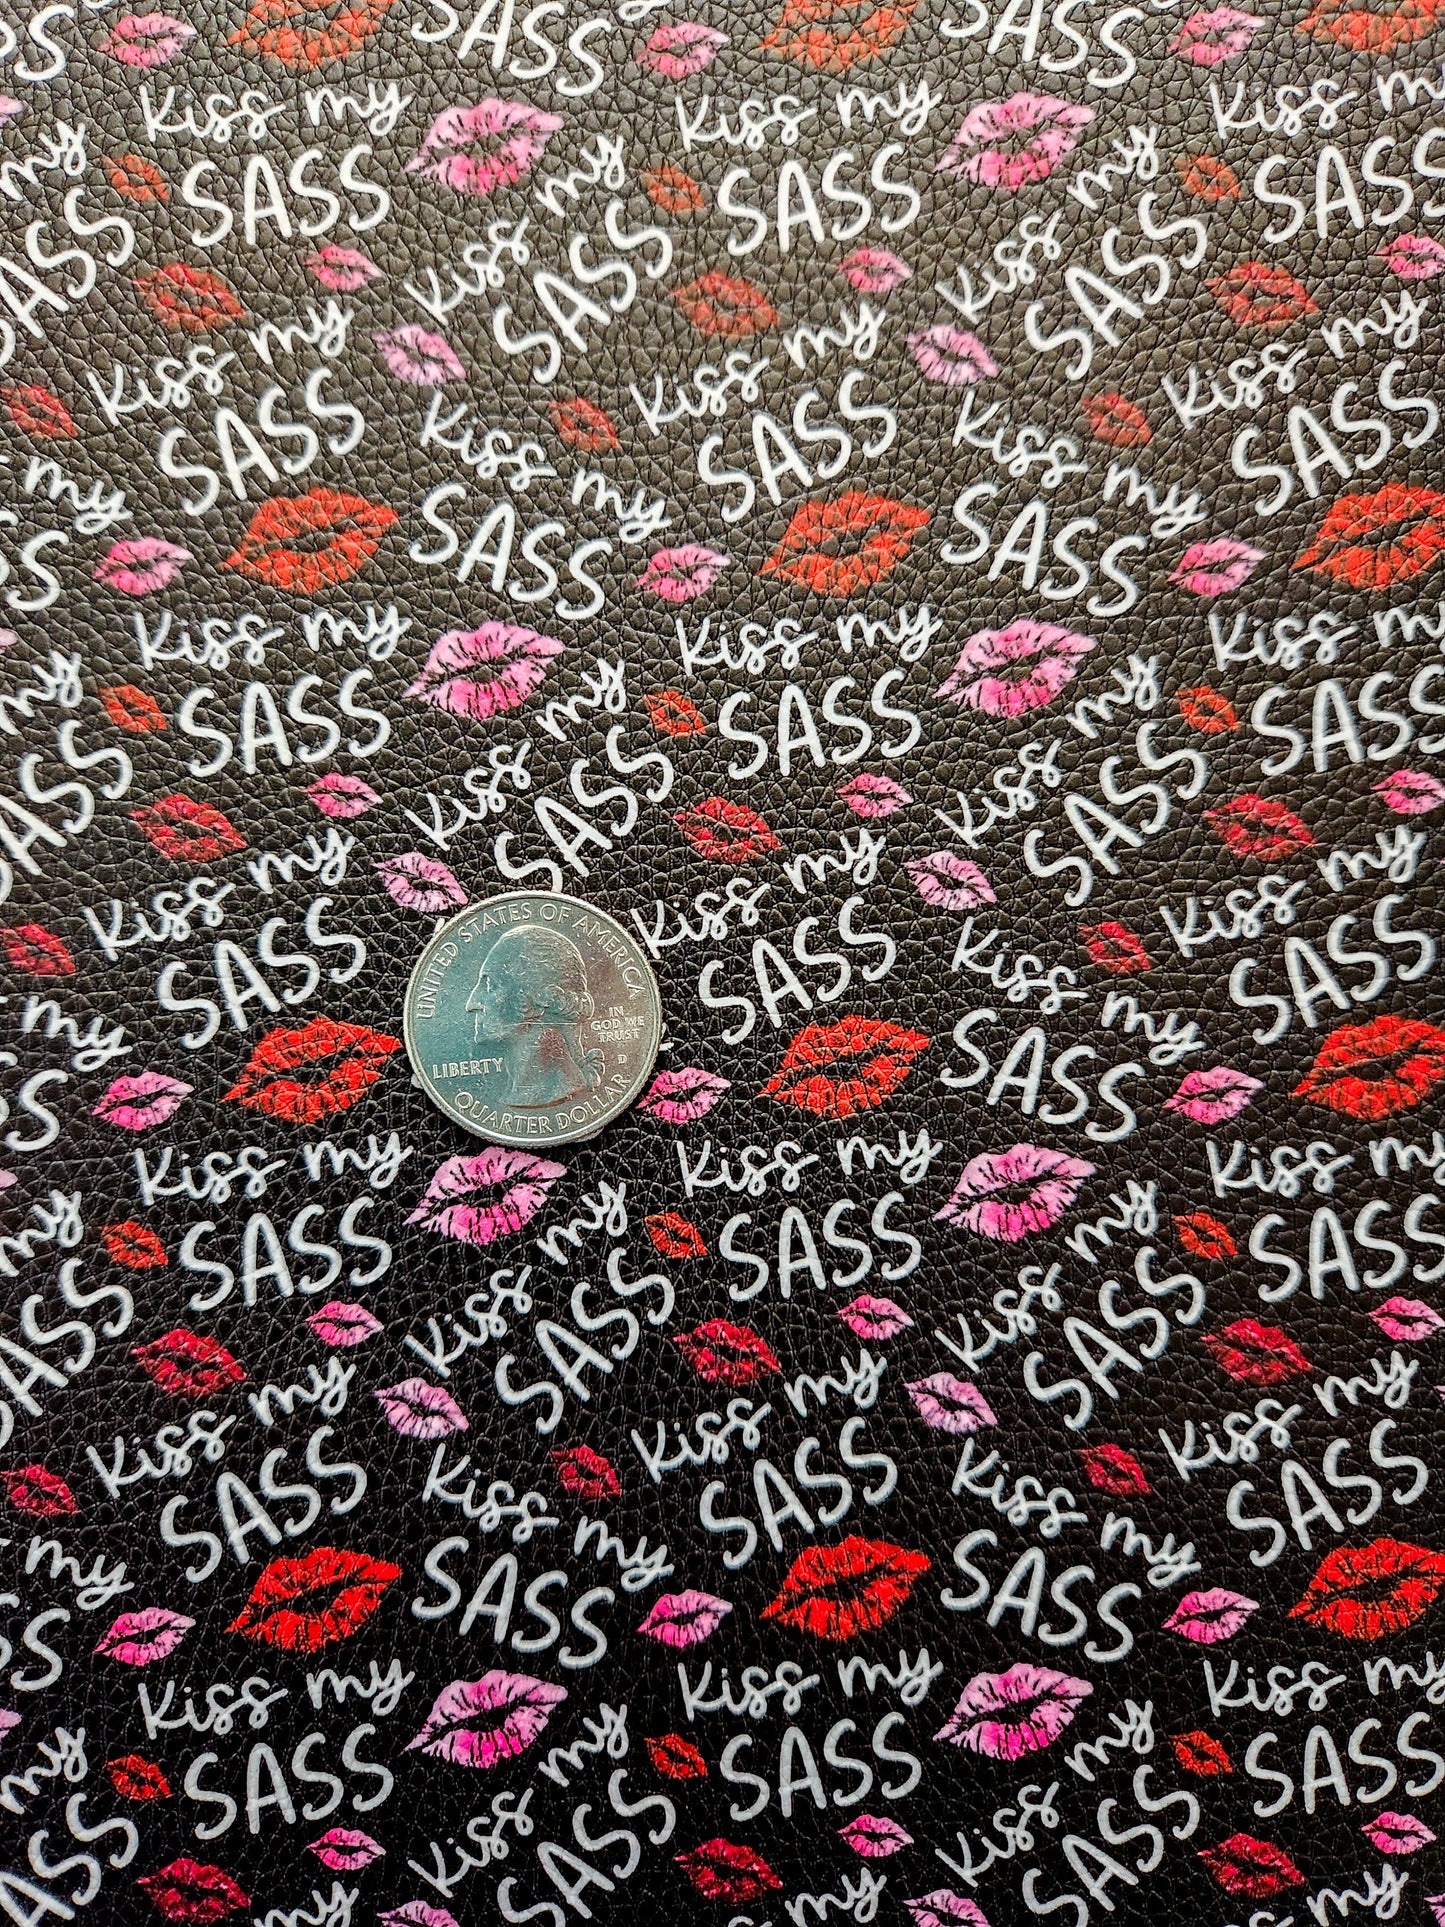 Kiss My Sass 9x12 faux leather sheet